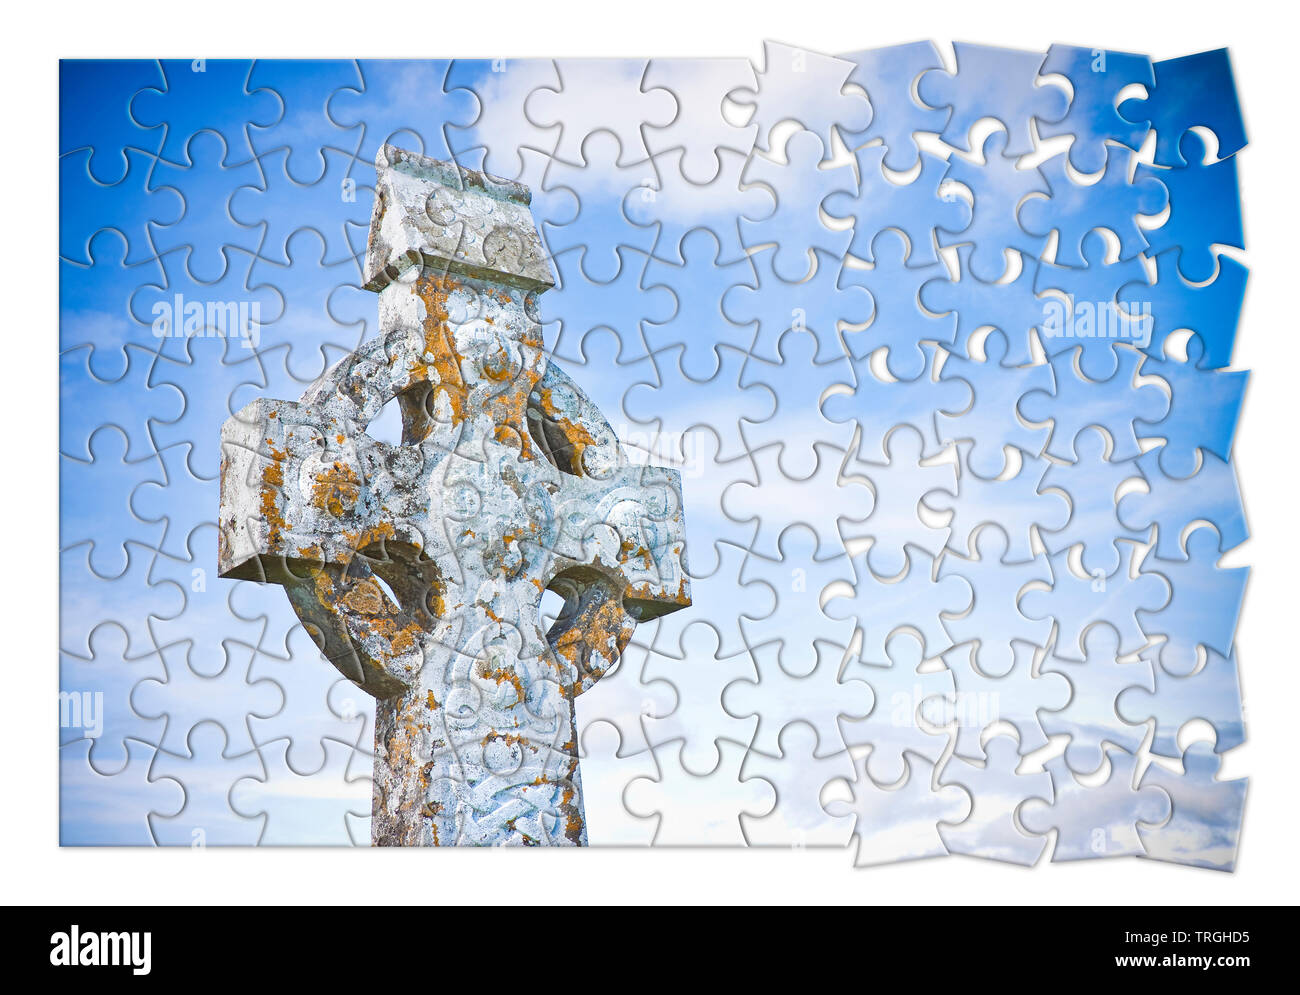 Patiently building of faith - Celtic carved stone cross against a sky background - concept image in jigsaw puzzle shape Stock Photo